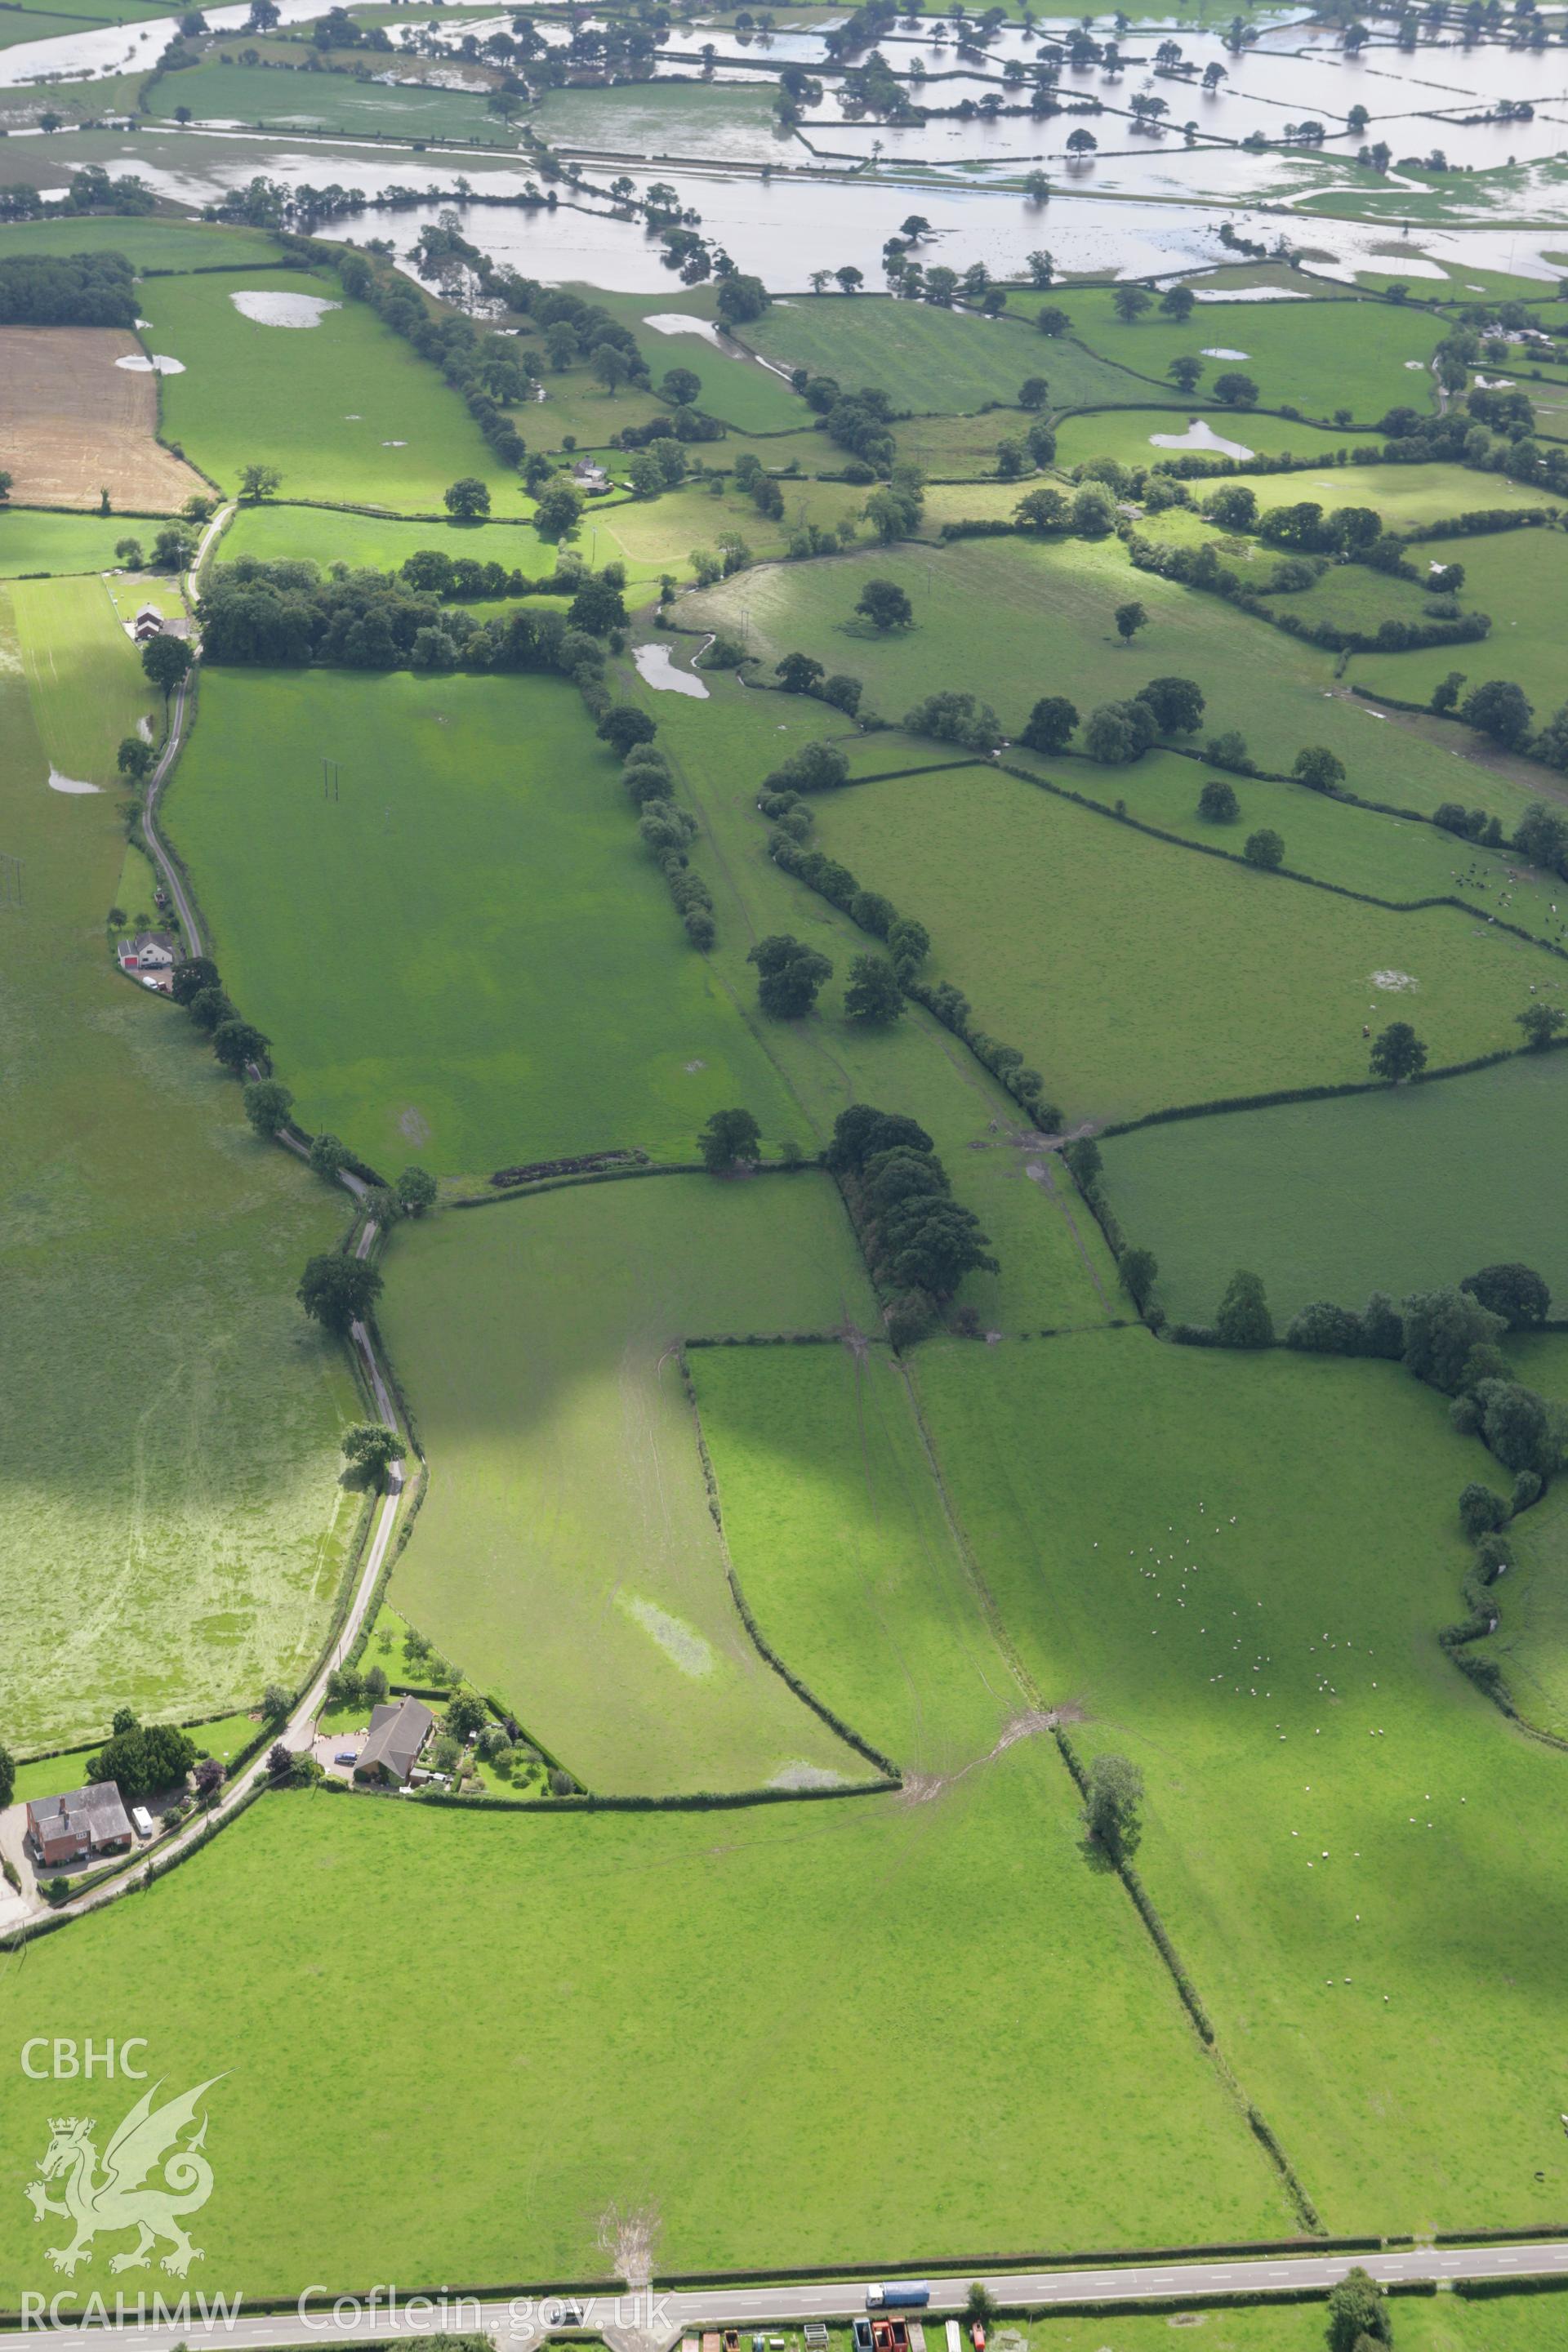 RCAHMW colour oblique aerial photograph of a section of Offa's Dyke extending 3000m southeast to Bele Brook, Llandrinio. Taken on 24 July 2007 by Toby Driver